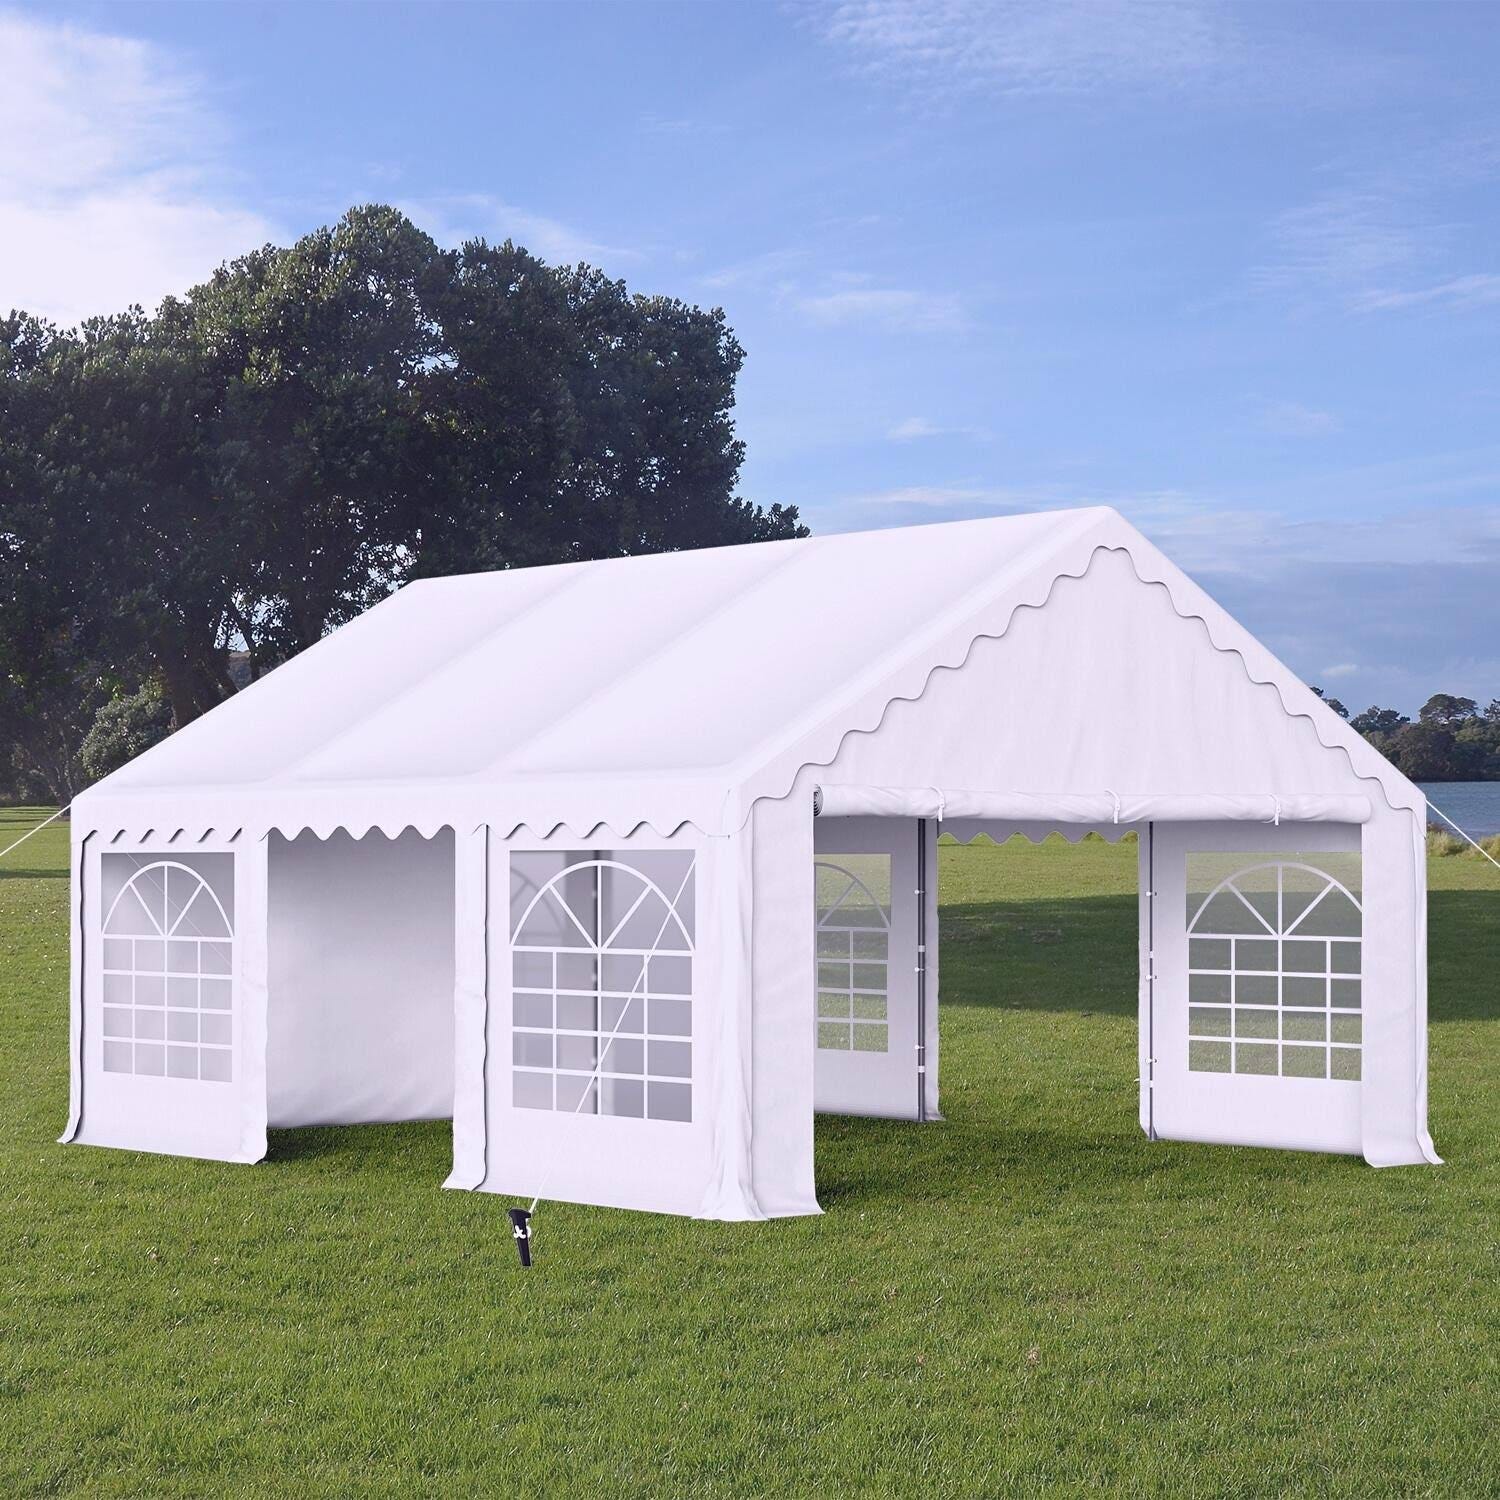 Stylish 16x20ft White Party Tent with 3 Windows & Easy Installation | Image